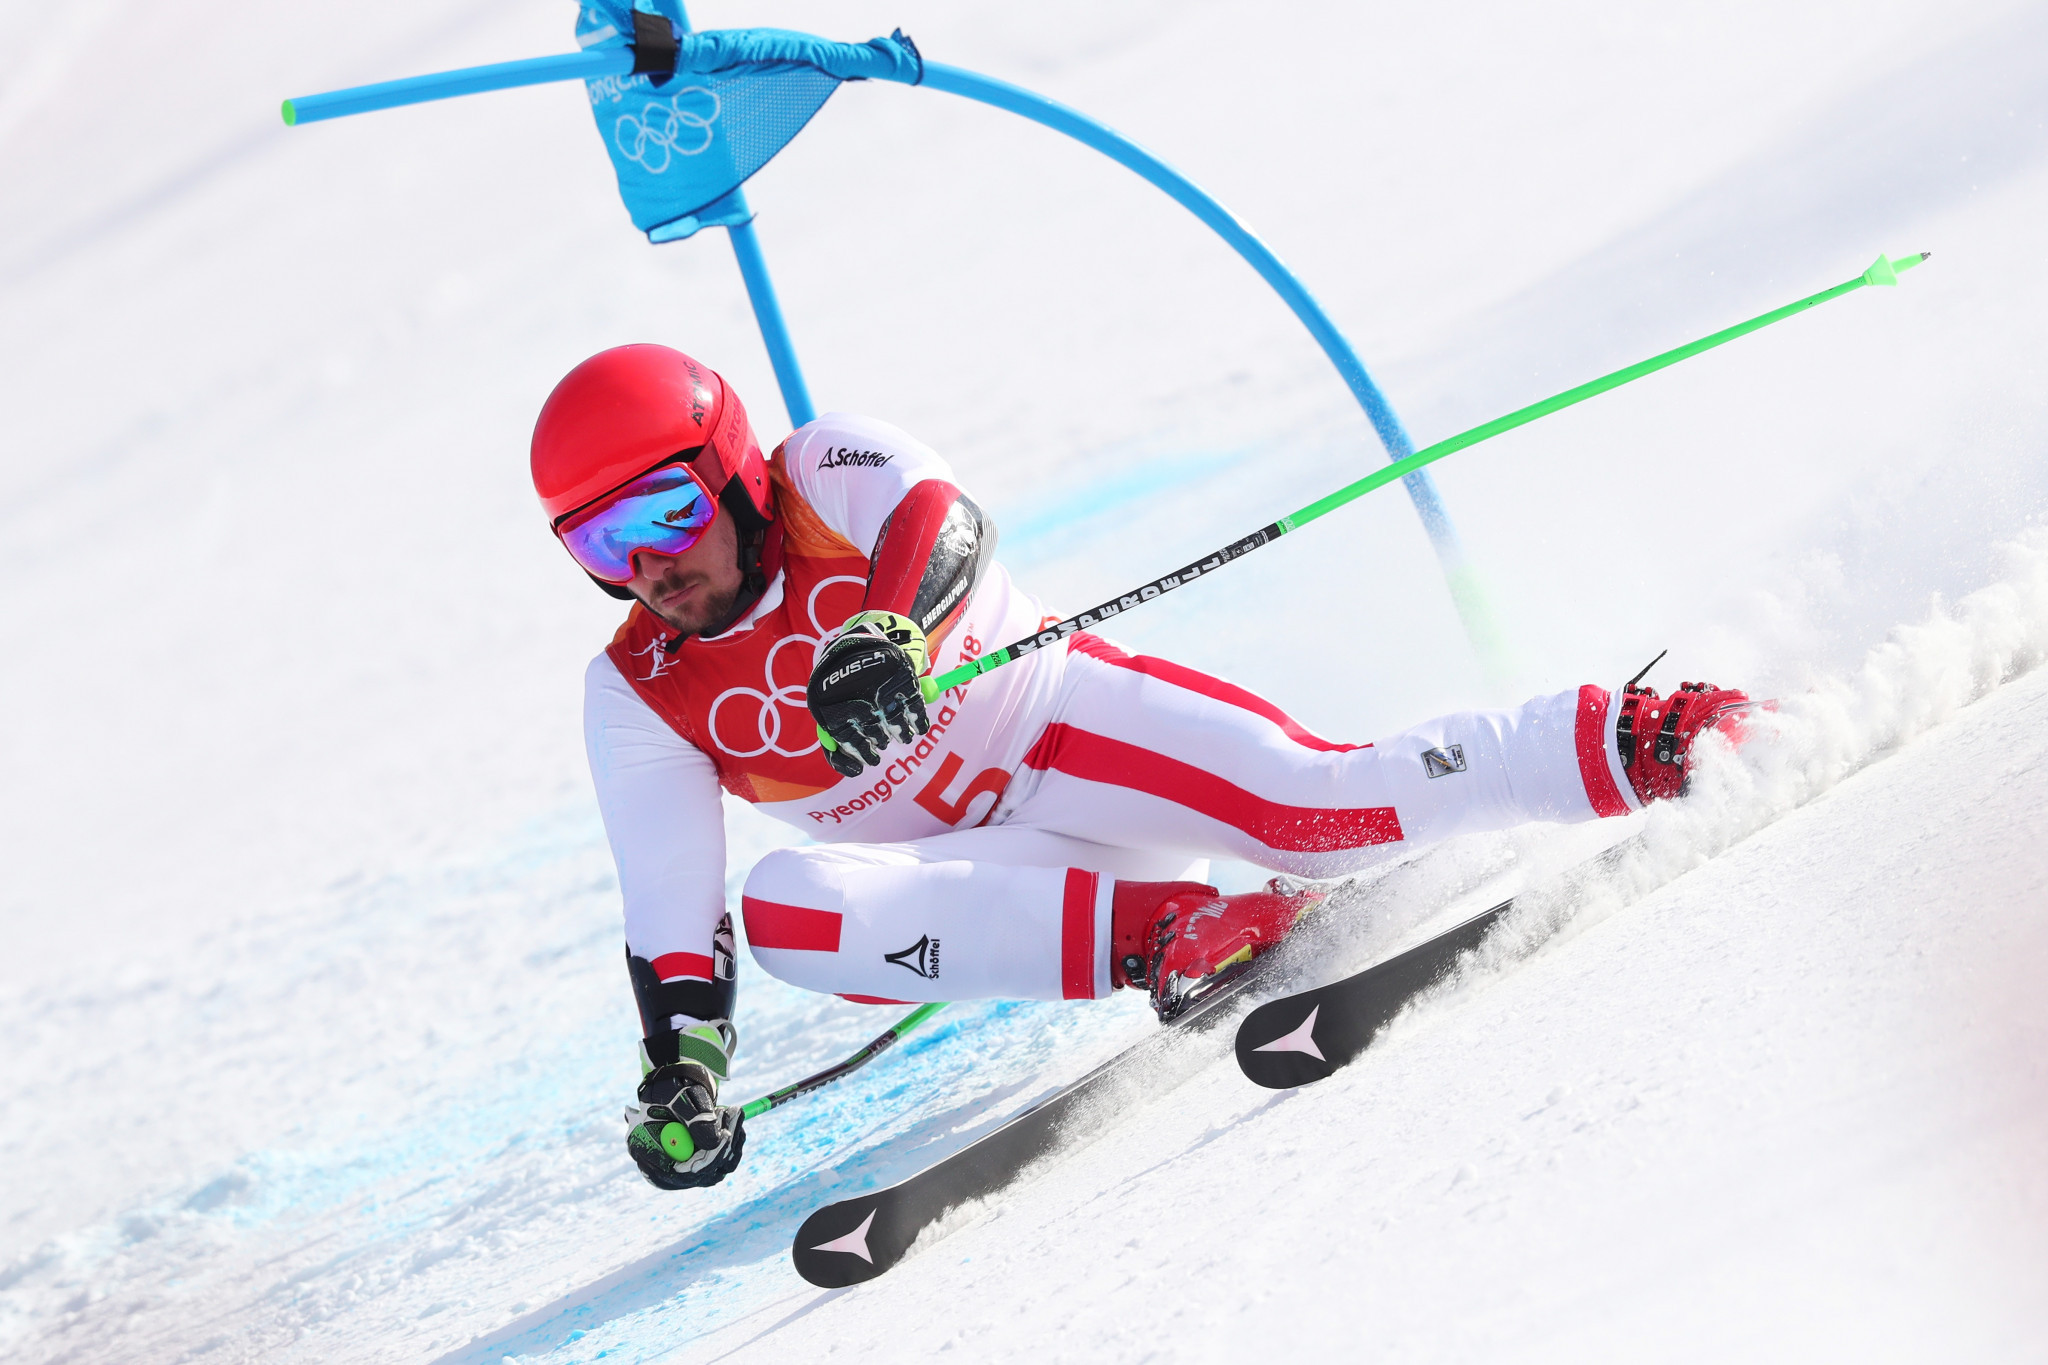 Austria's Marcel Hirscher underlined his dominance of the technical events with another gold medal ©Getty Images